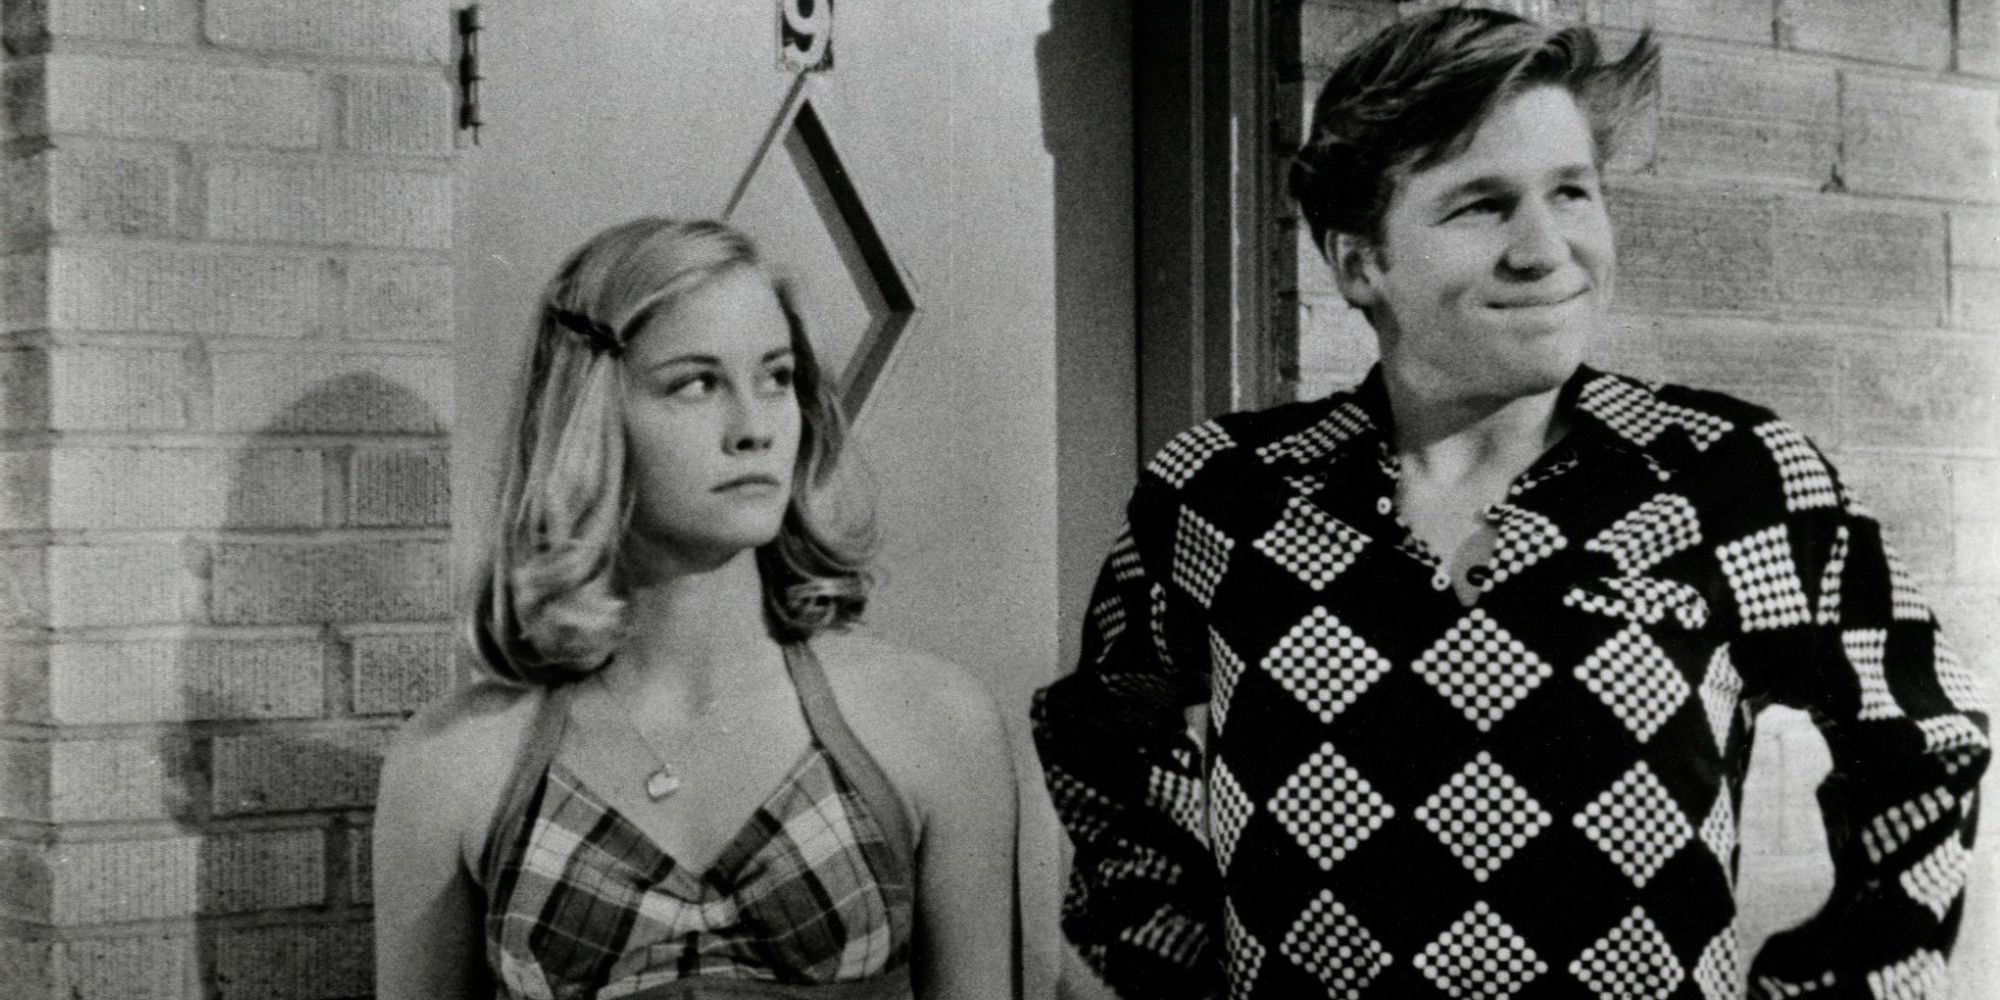 Cybil Shepherd as Jacy looks annoyed while Jeff Bridges as Duane smiles in The Last Picture Show